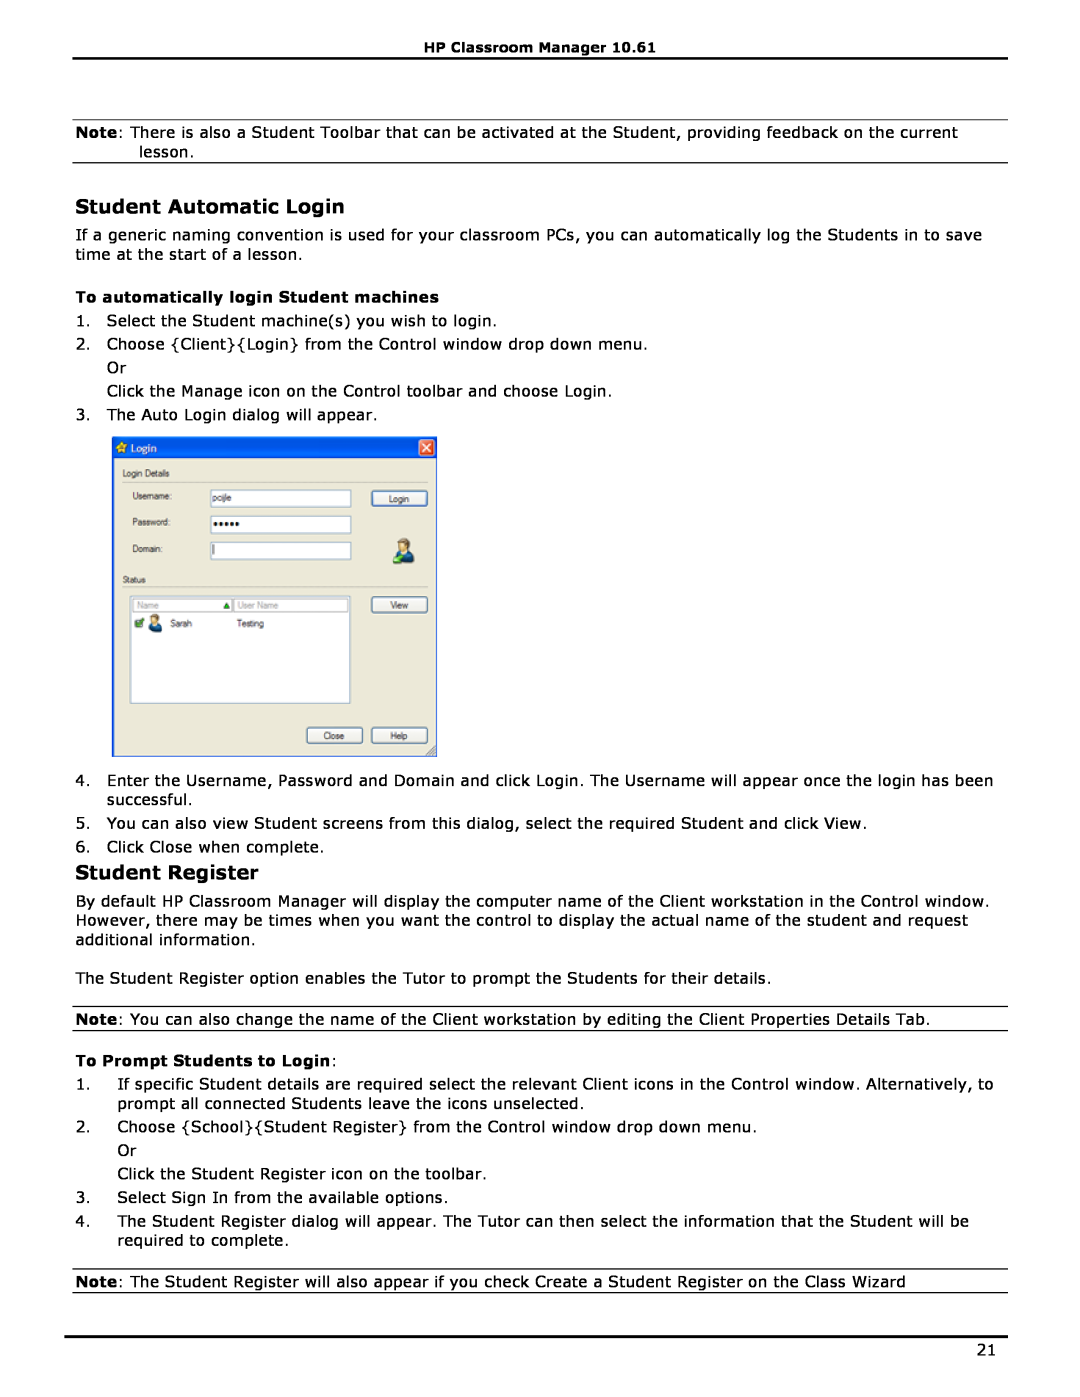 HP Classroom Manager manual Student Automatic Login, Student Register, To automatically login Student machines 